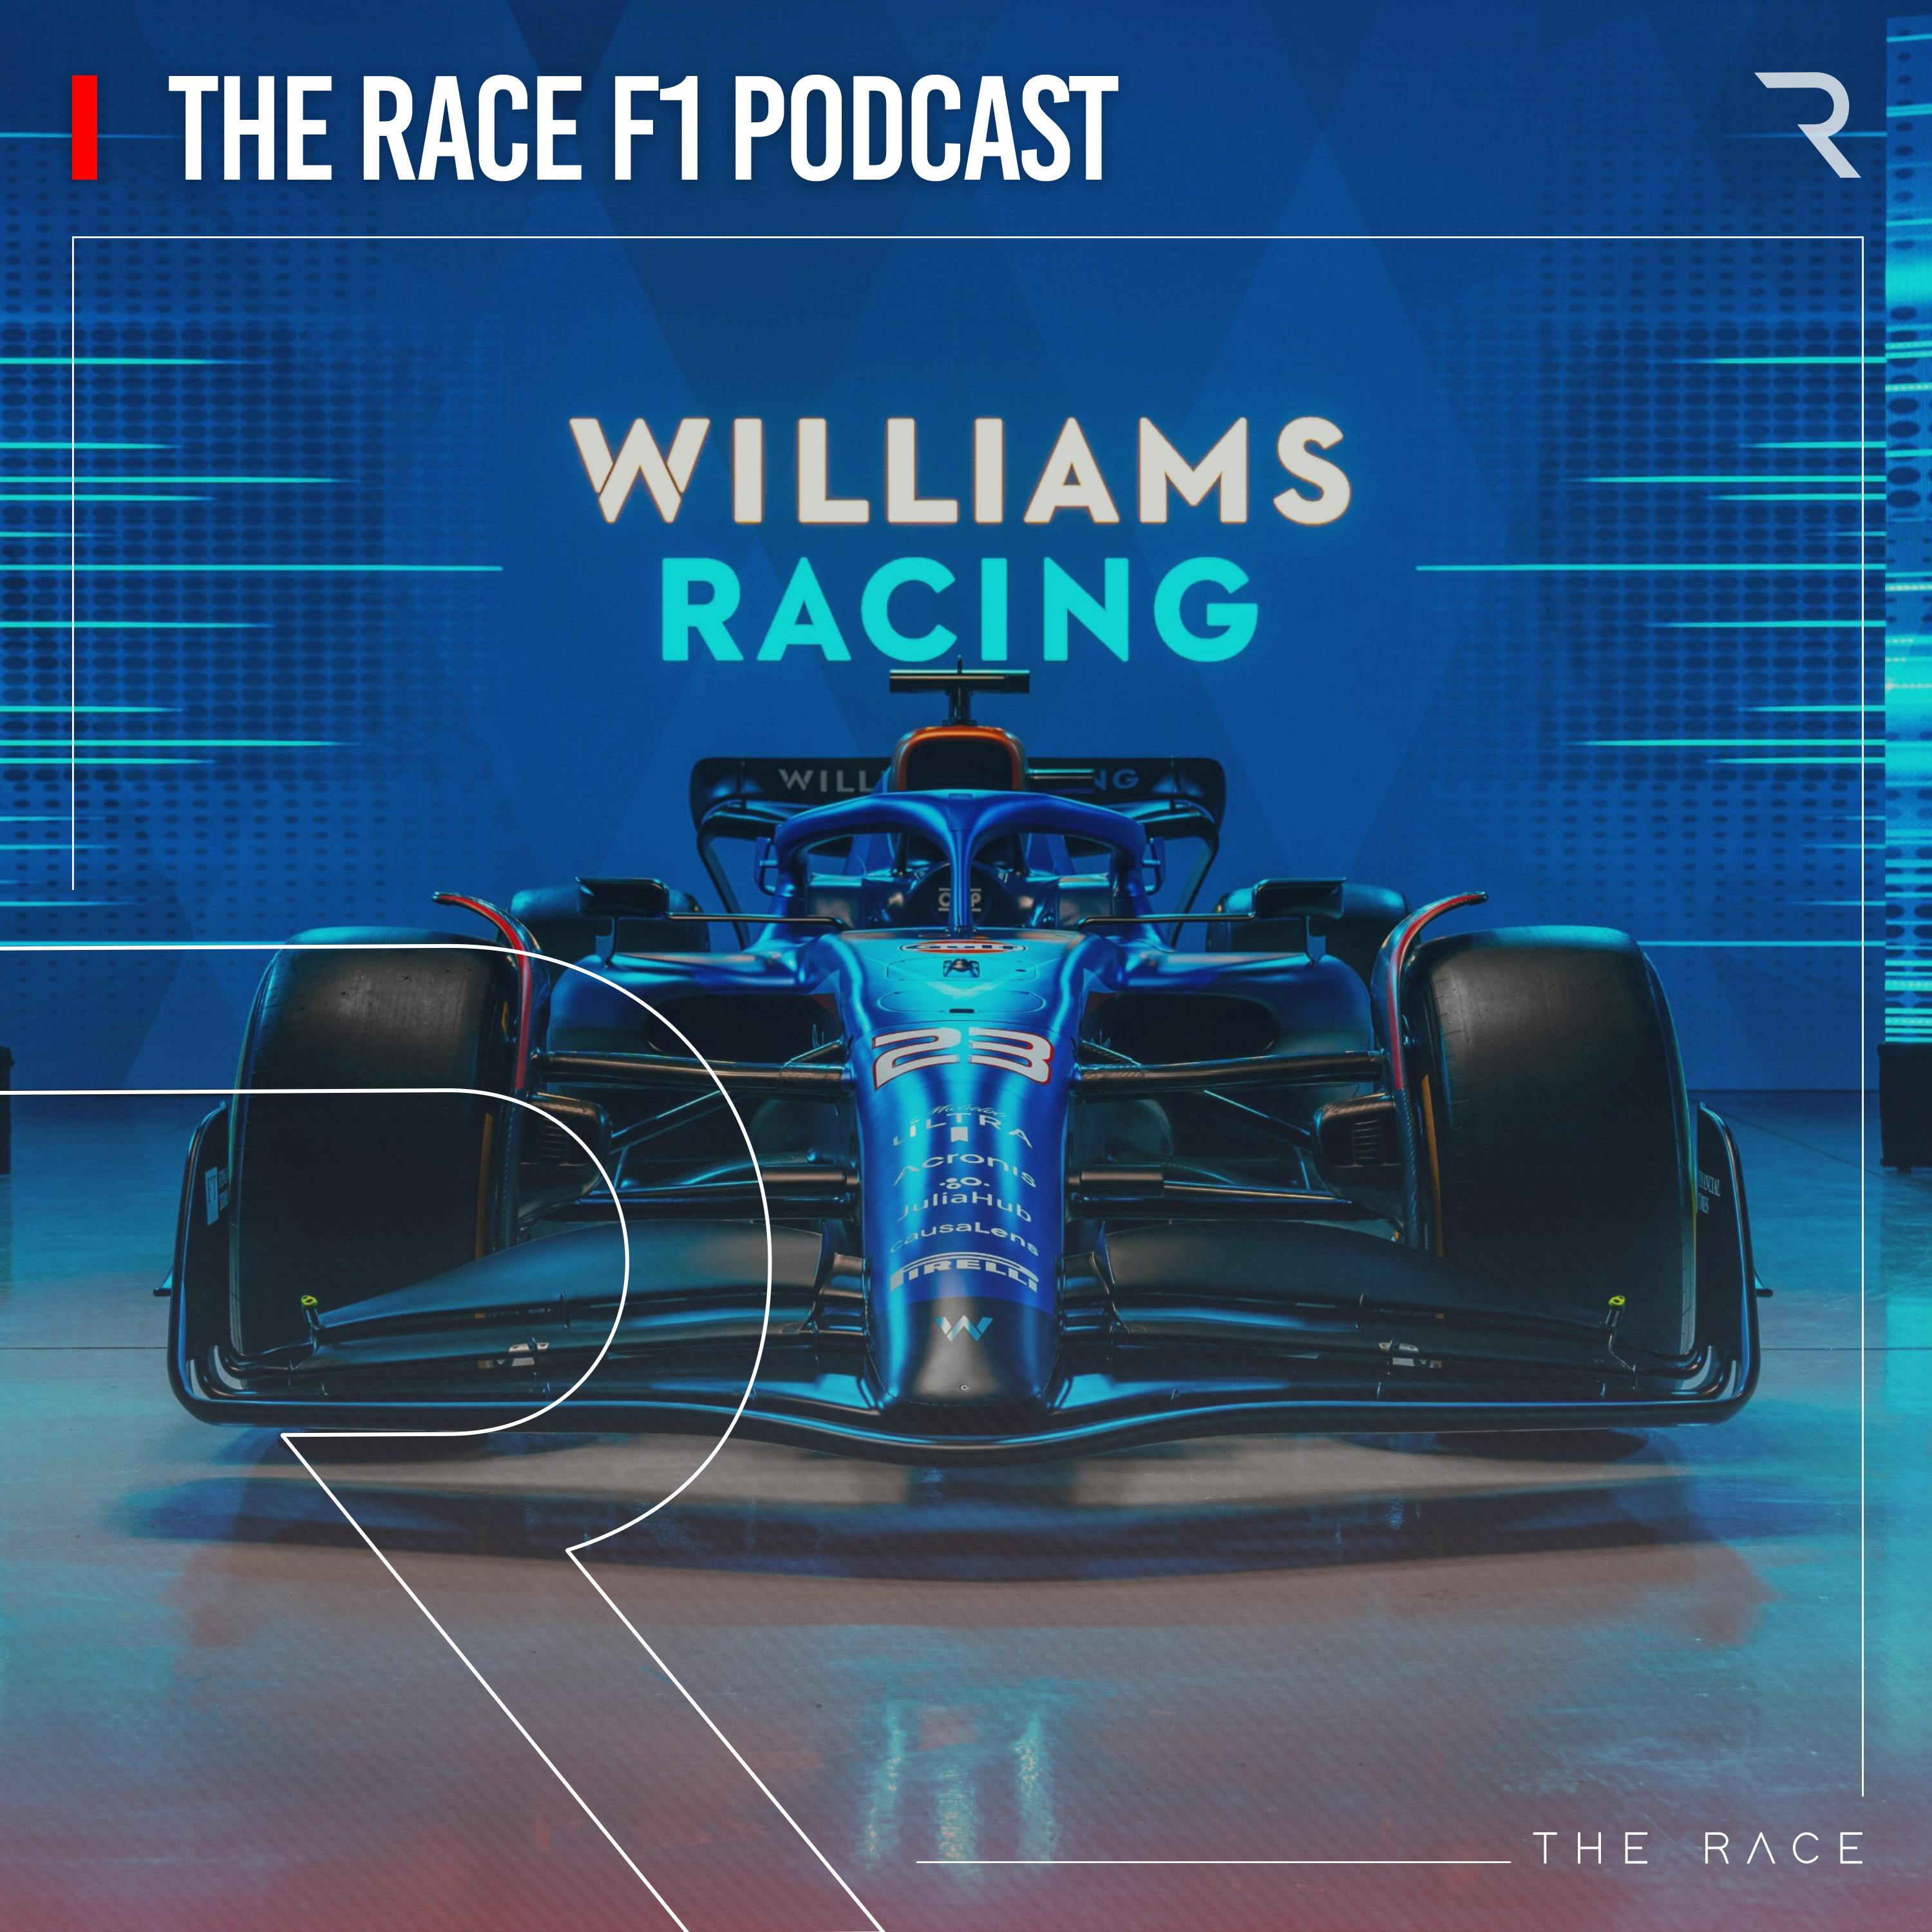 Williams reveals new look and 2023 car hints